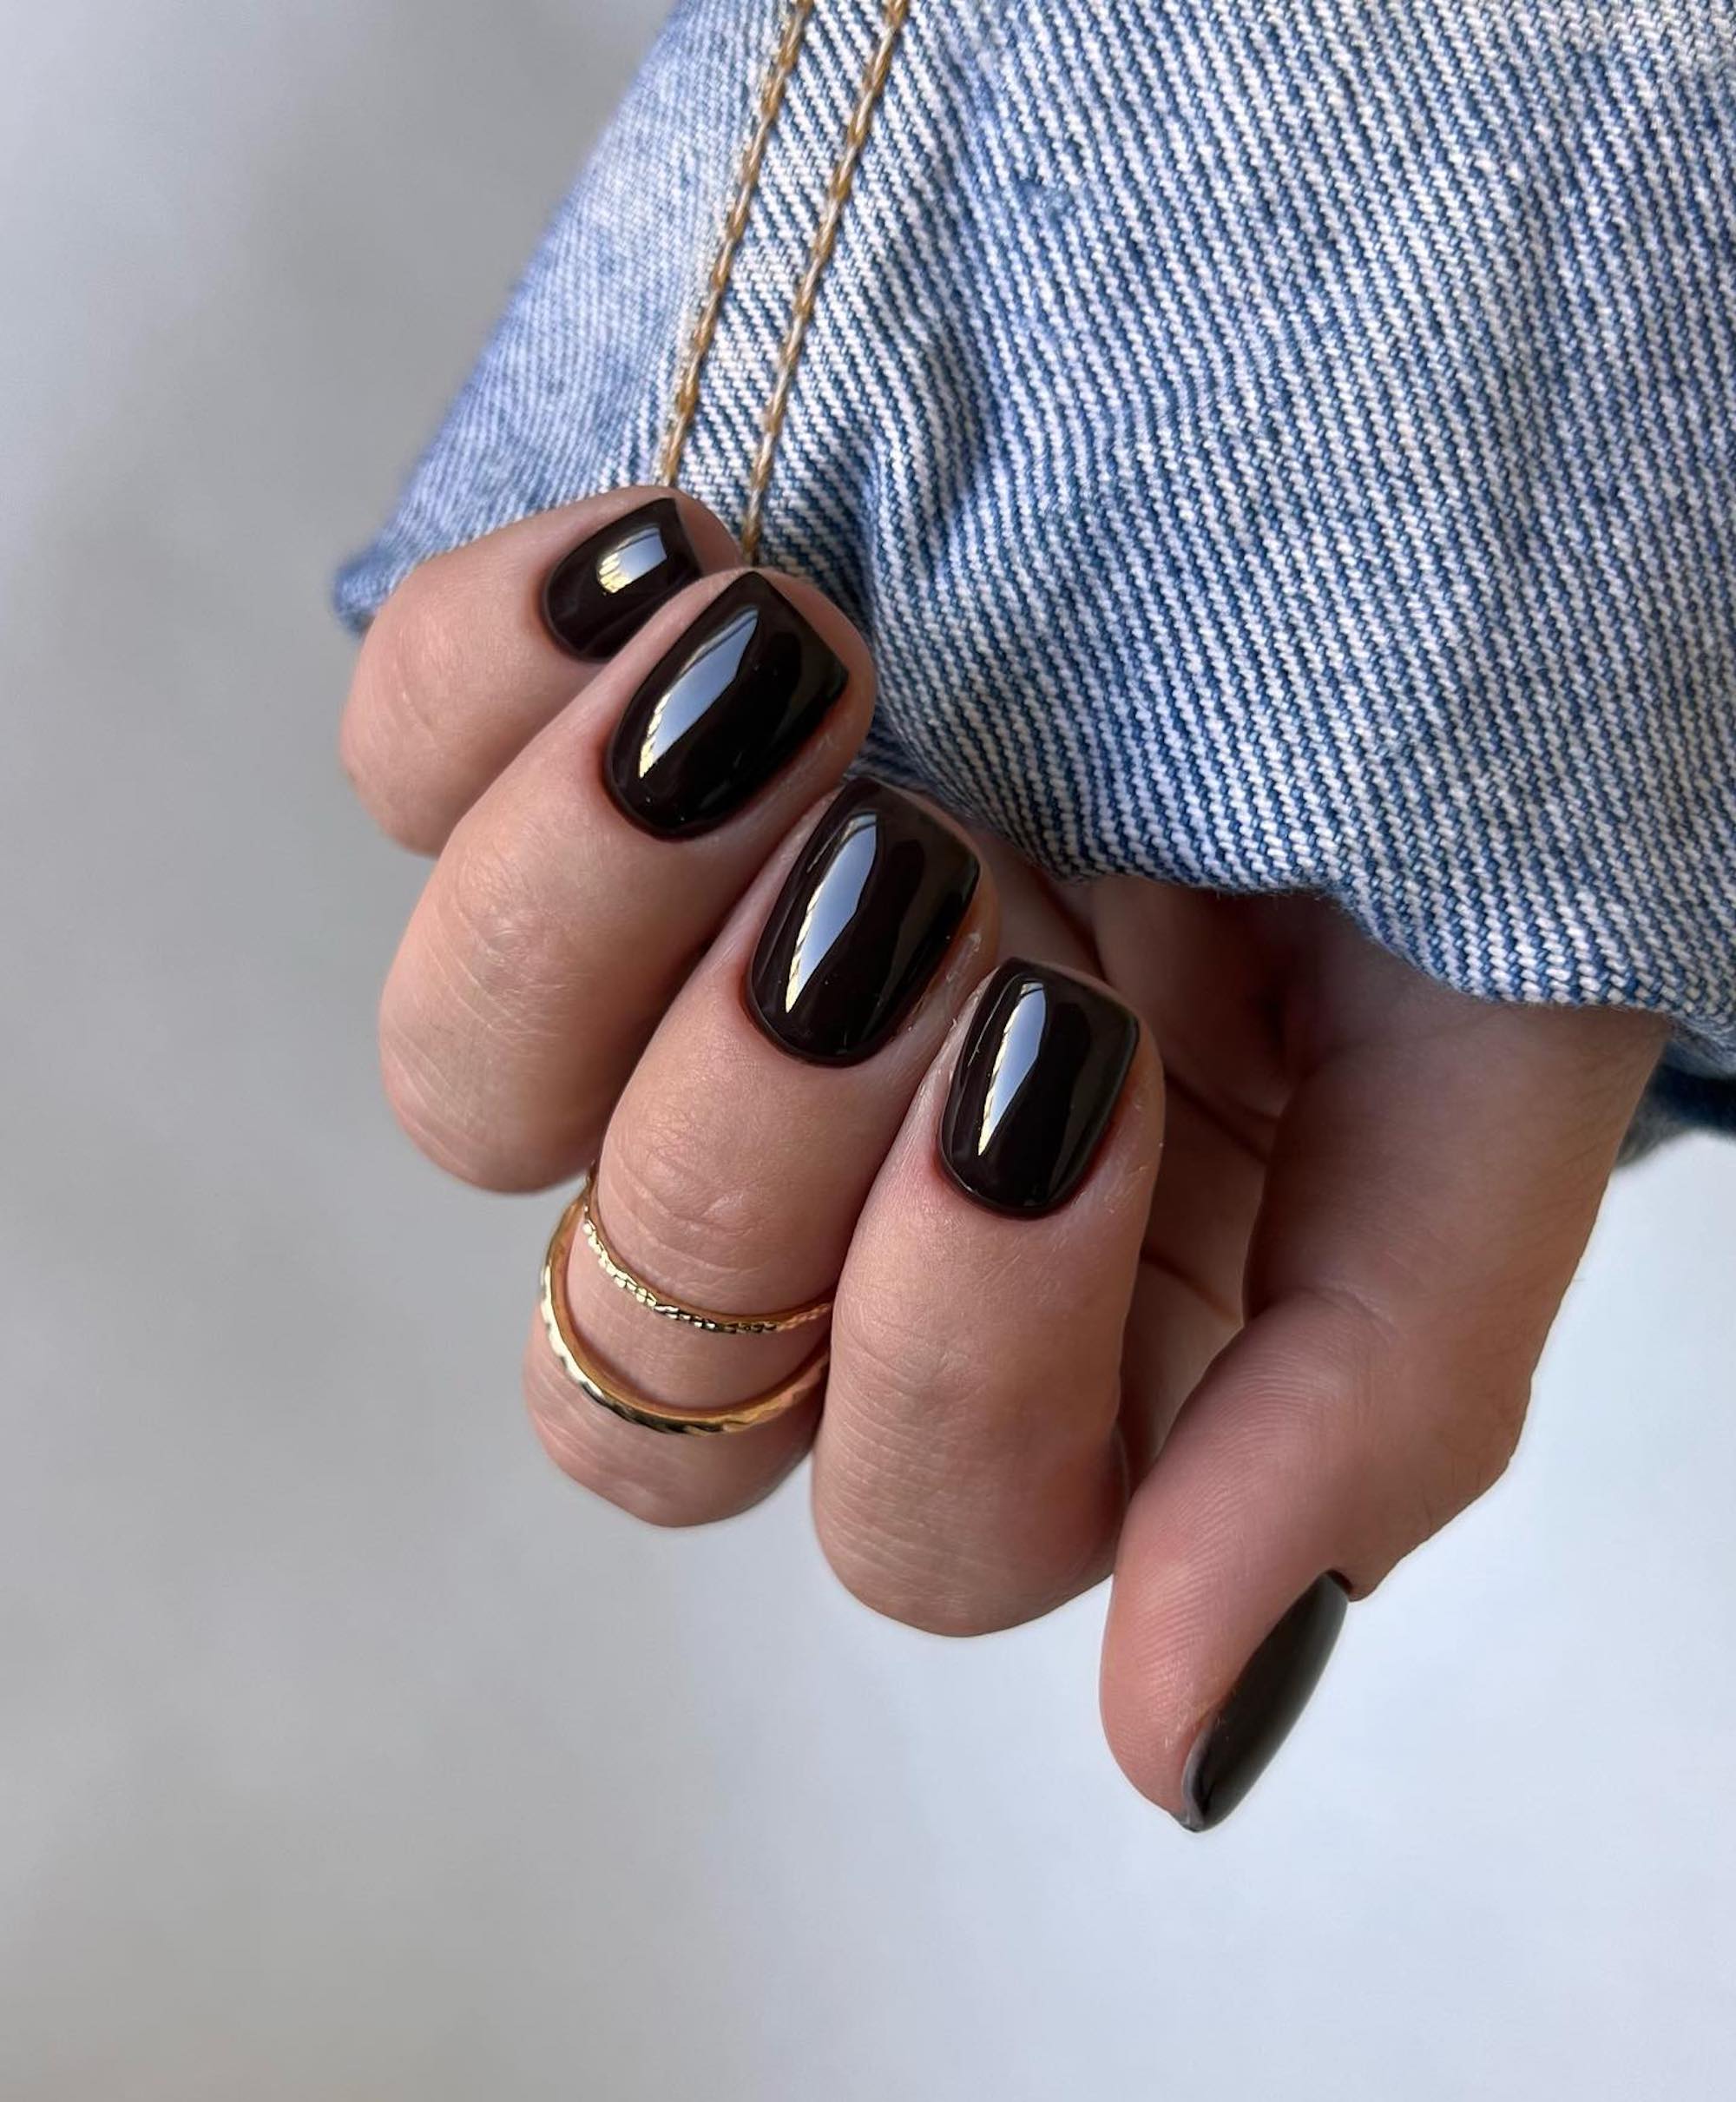 What is a manicure & what to expect?